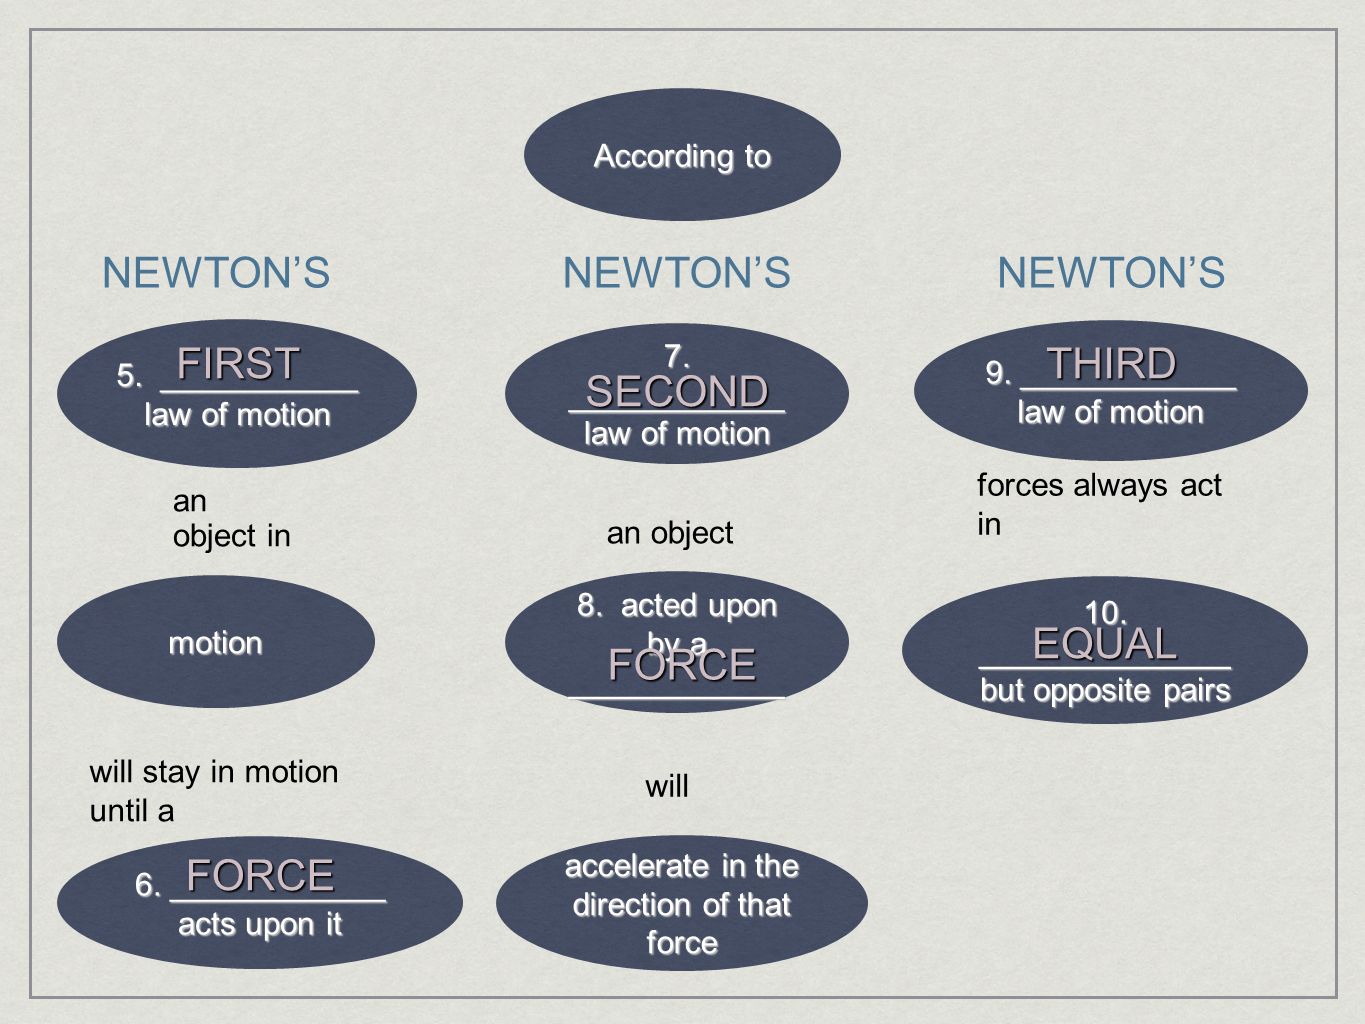 NEWTON’S NEWTON’S NEWTON’S FIRST THIRD SECOND EQUAL FORCE FORCE